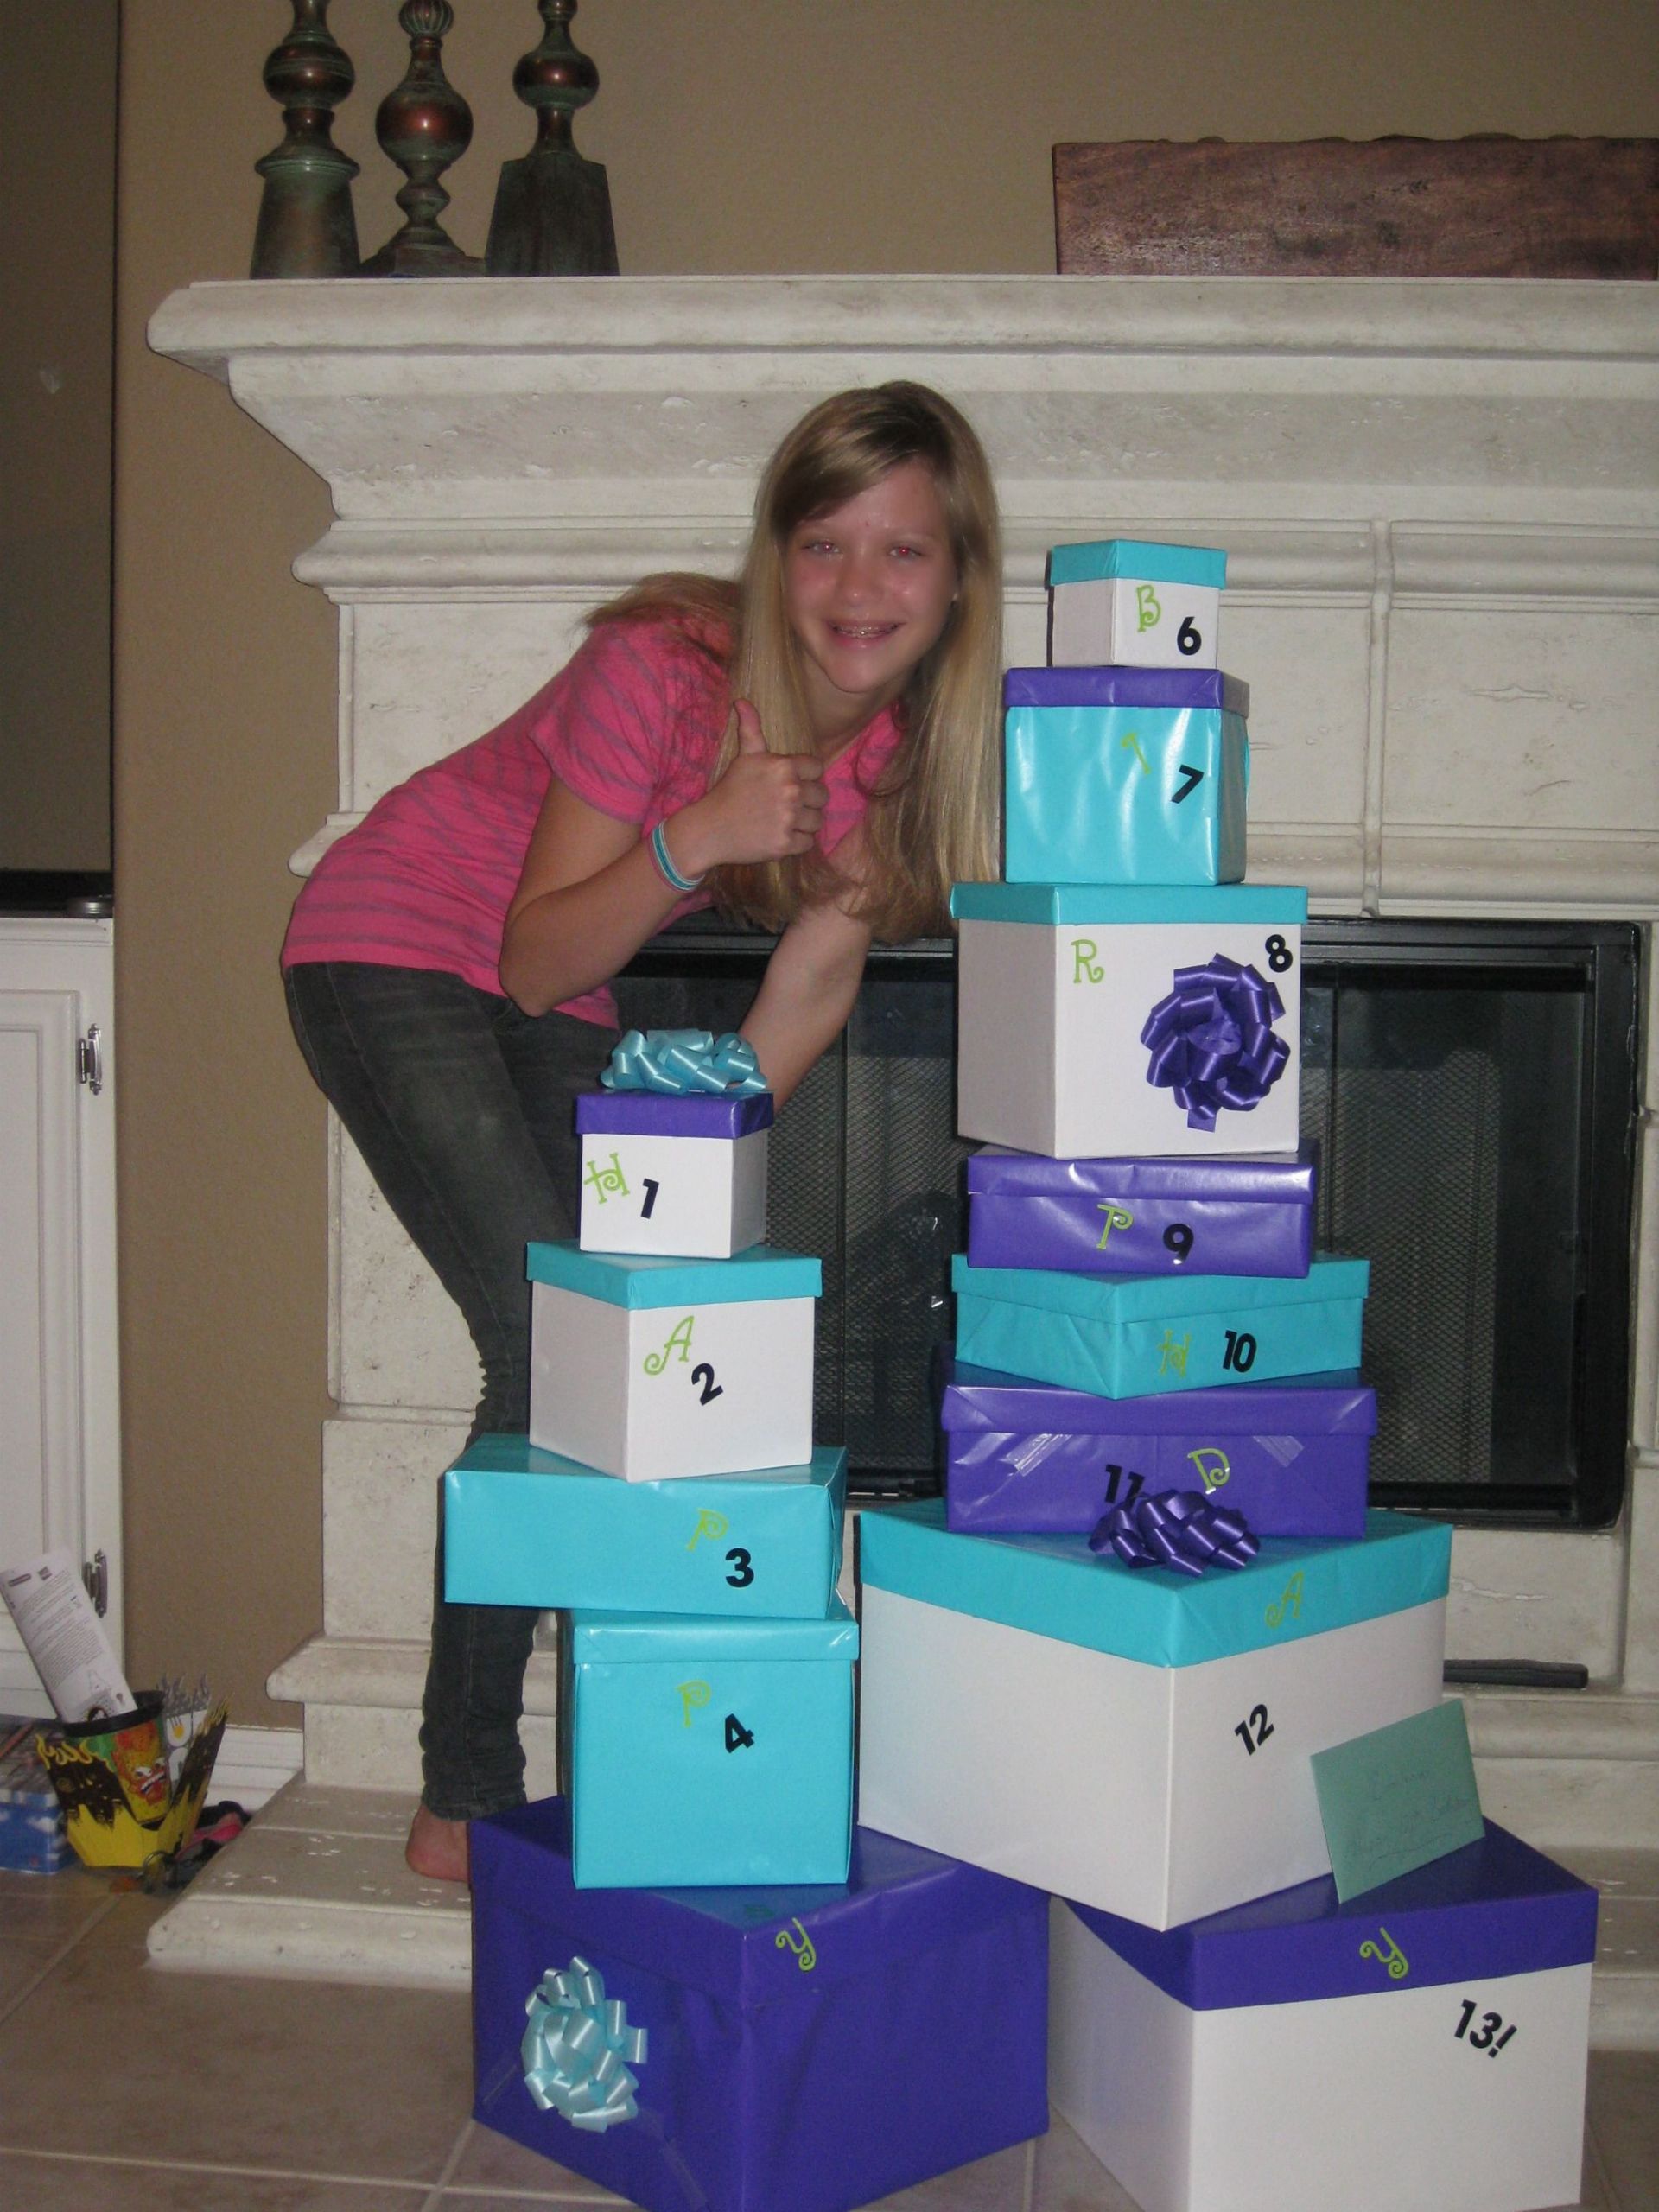 Birthday Gift Ideas For 12 Year Old Girls
 Top 20 13th Birthday Gift Ideas for Girl Home Family